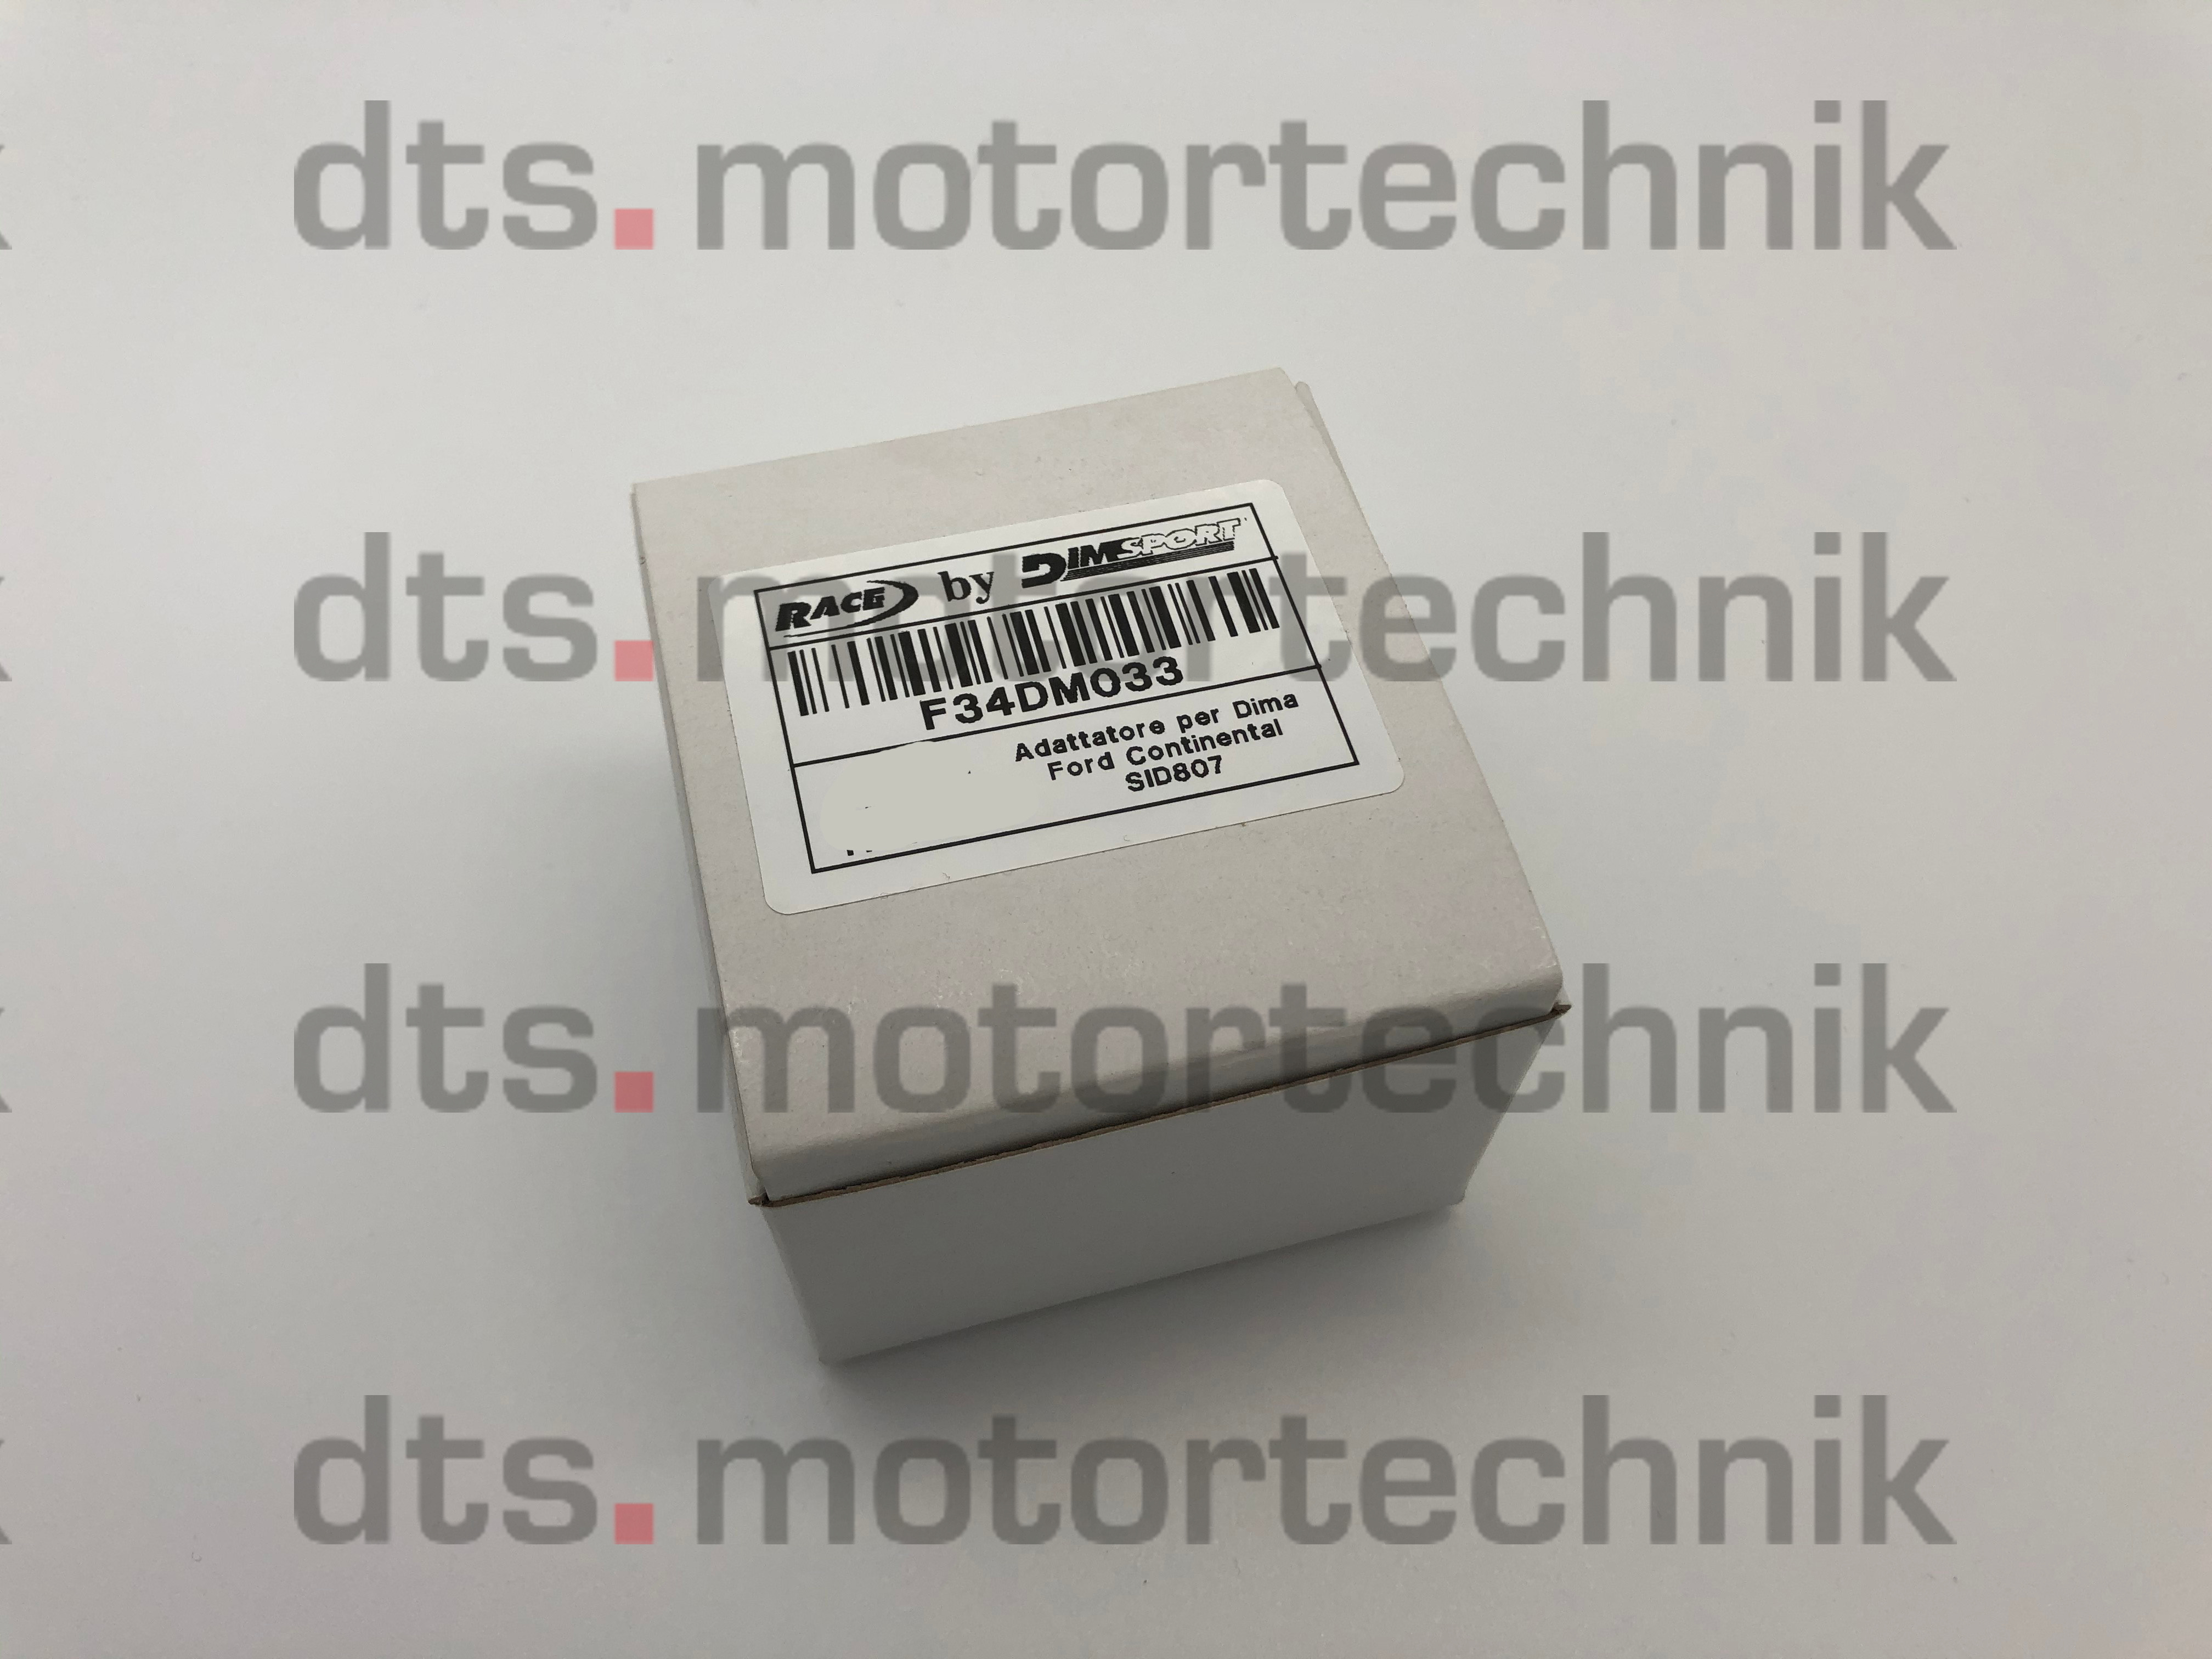 Continental SID807 TC1797 (Ford) Infineon Tricore CPU Terminaladapter